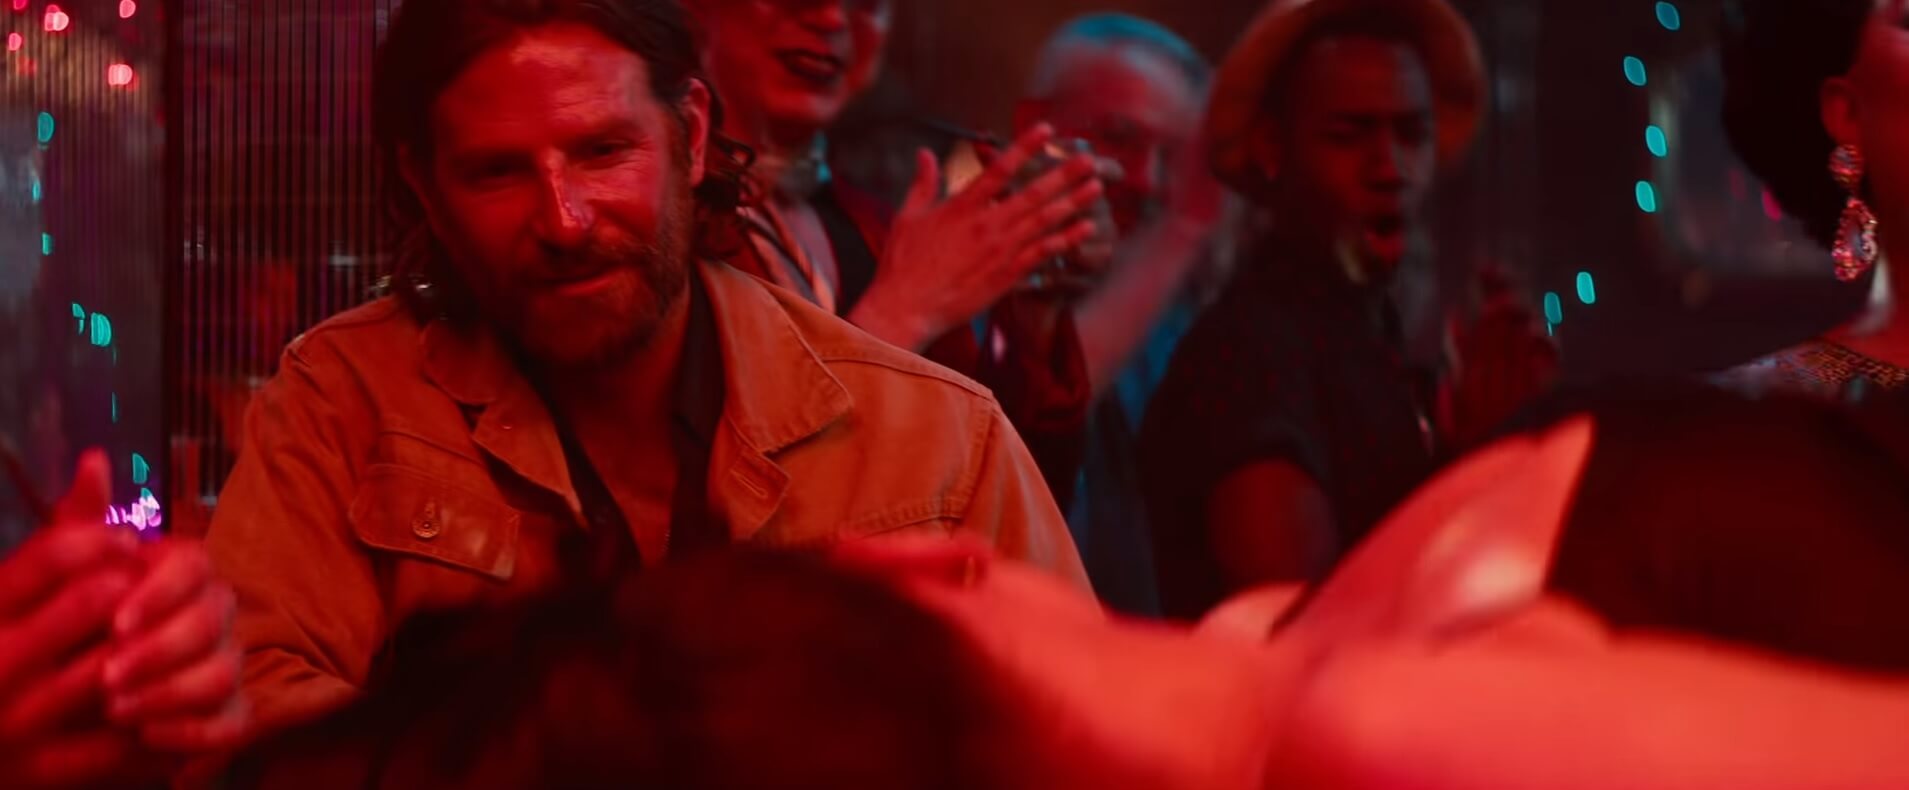 A Star is Born_Bradley Cooper_2018_HD_Images1